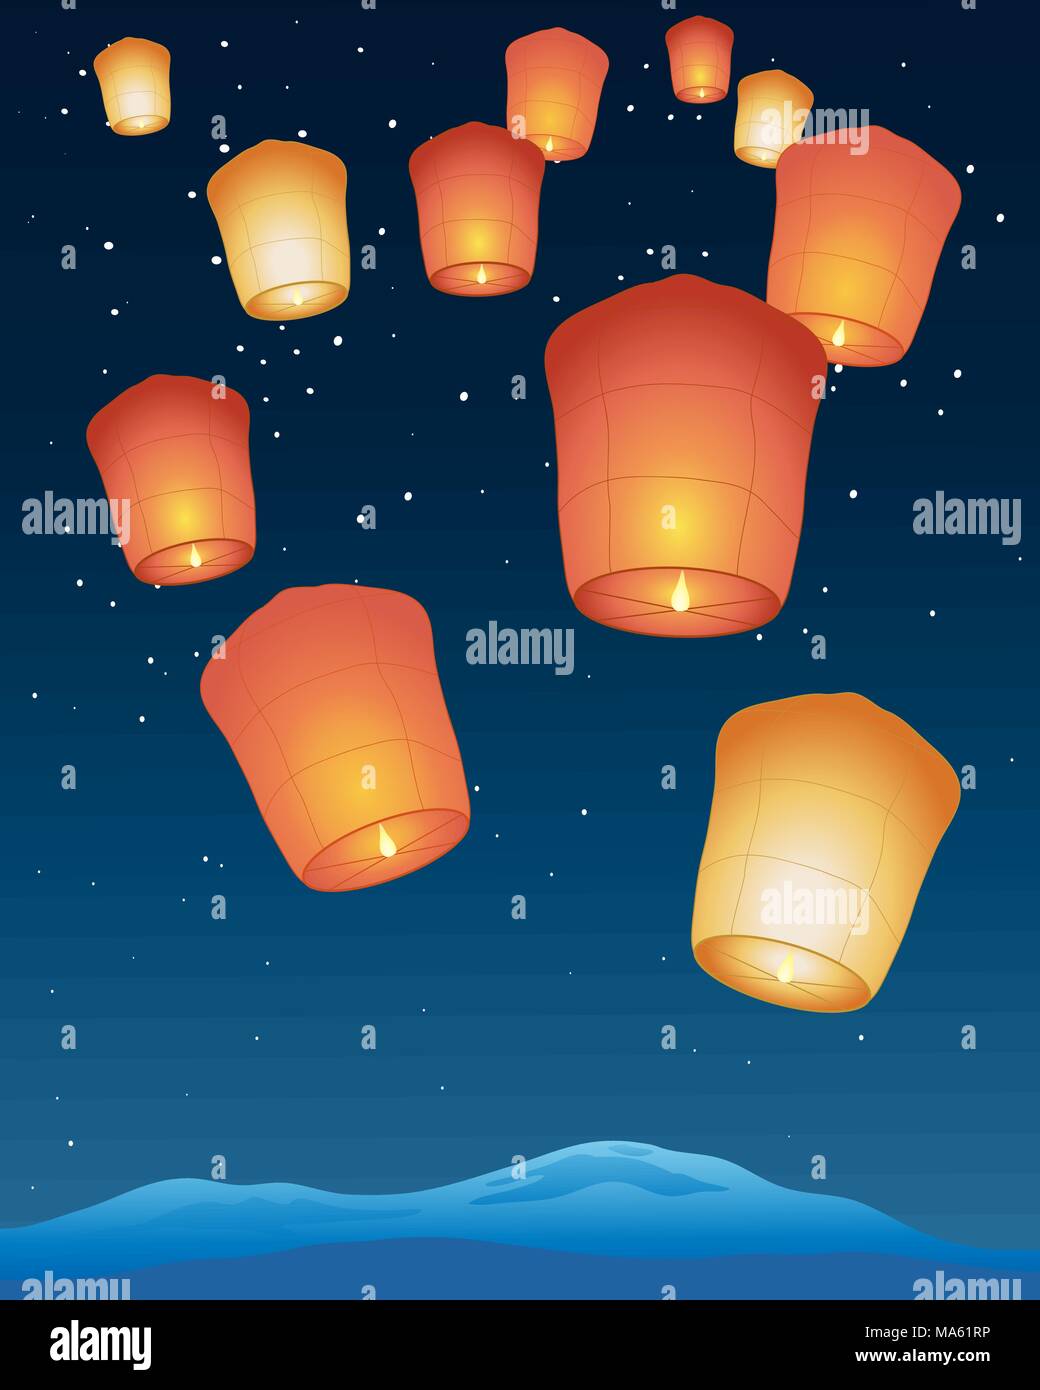 a vector illustration in eps 10 format of Chinese sky lanterns with bright flames floating away into a starry night sky Stock Vector